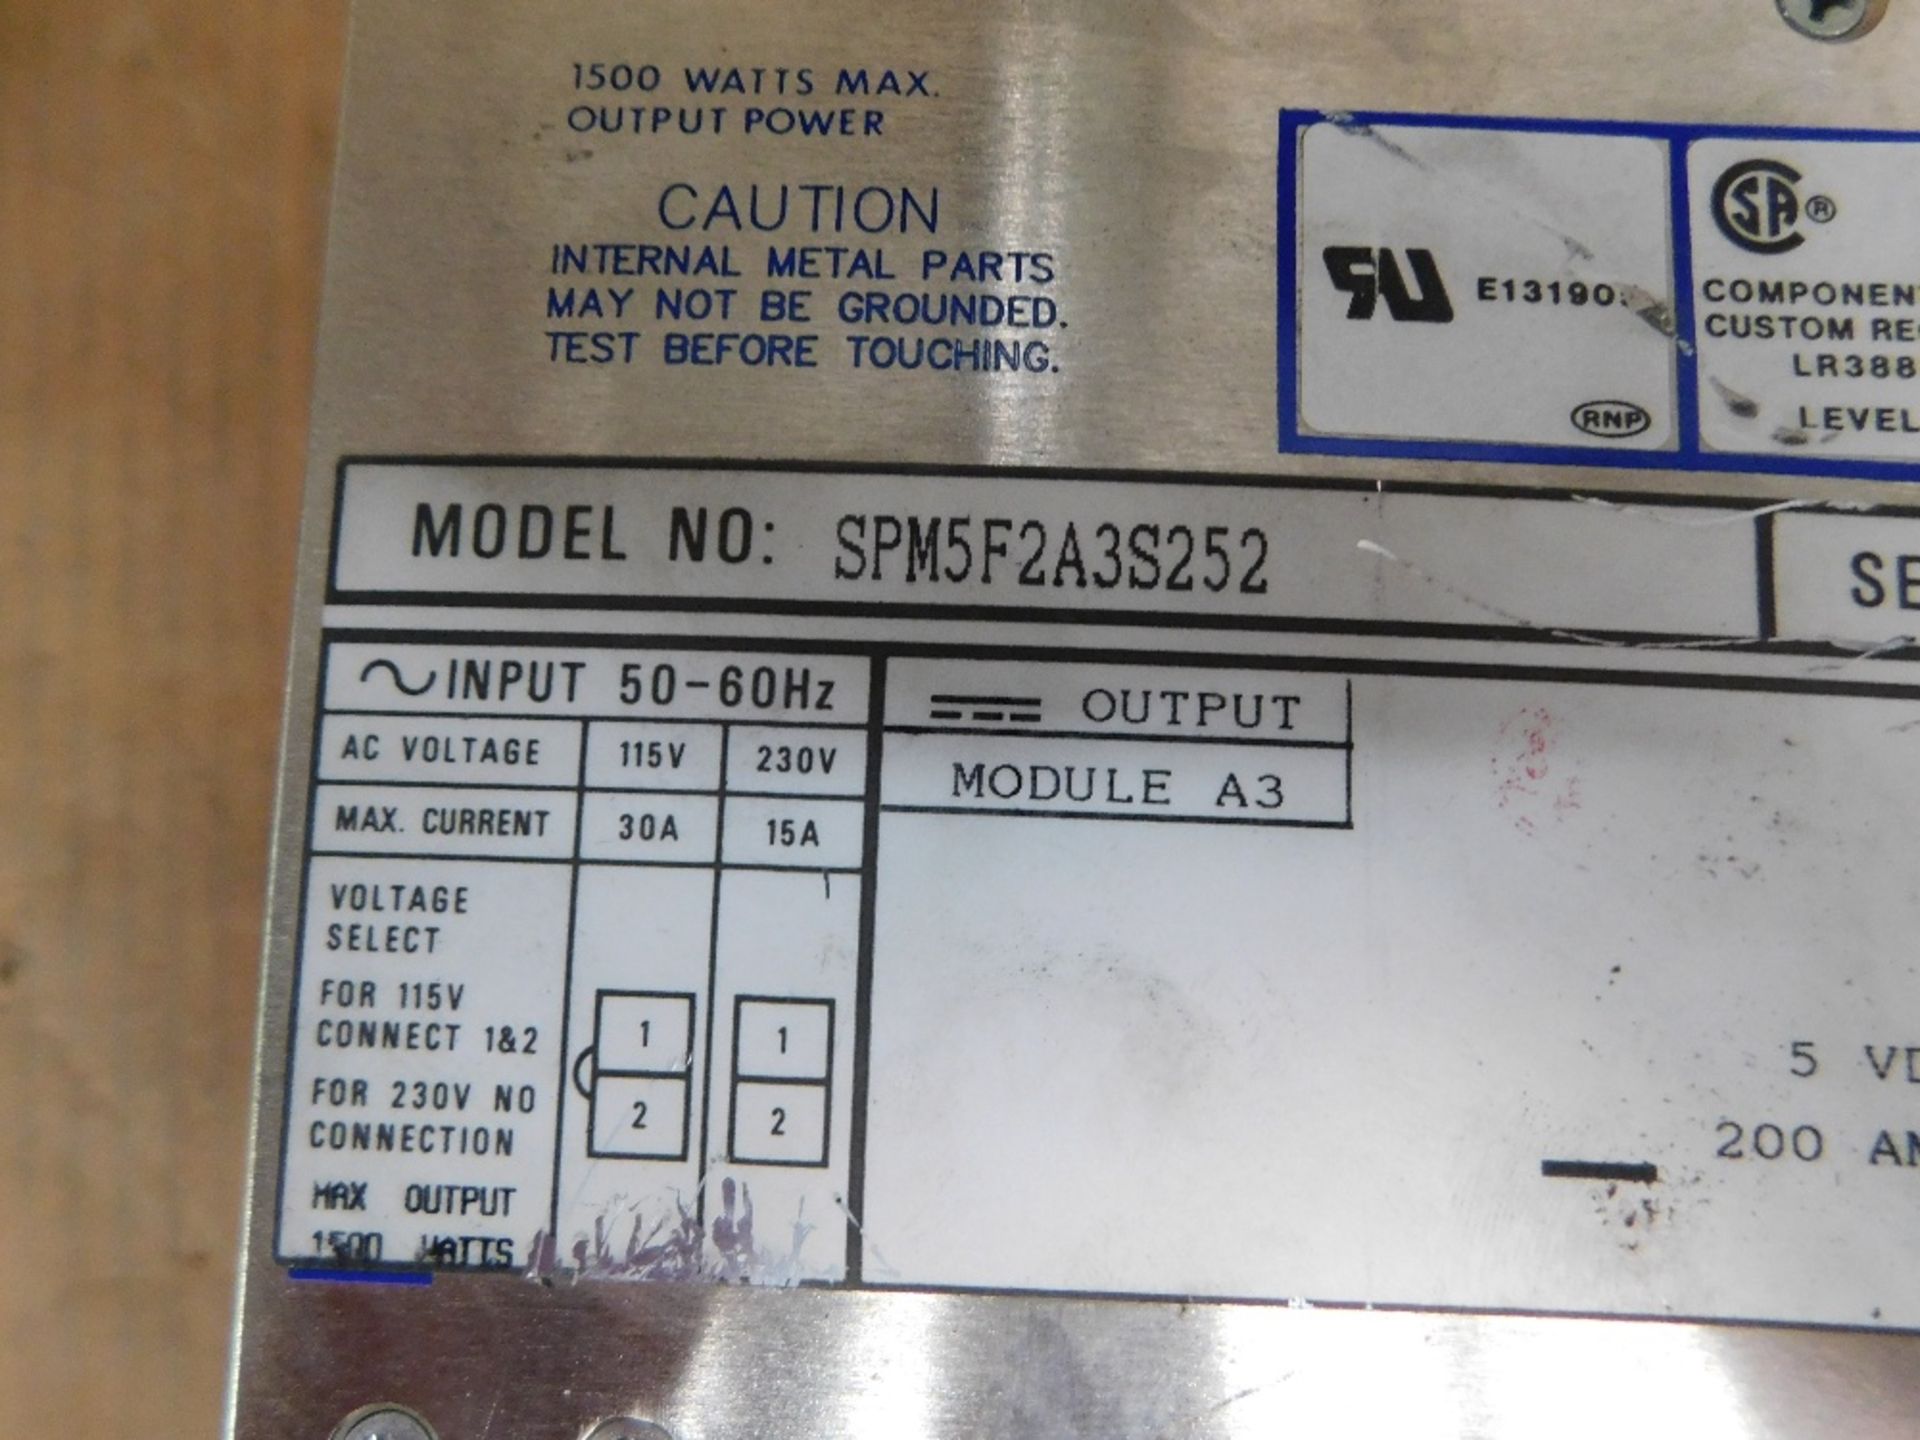 3x Power One New No Box Surplus SF-435442 Other Power Supplies 200A 5VDC - Image 5 of 8